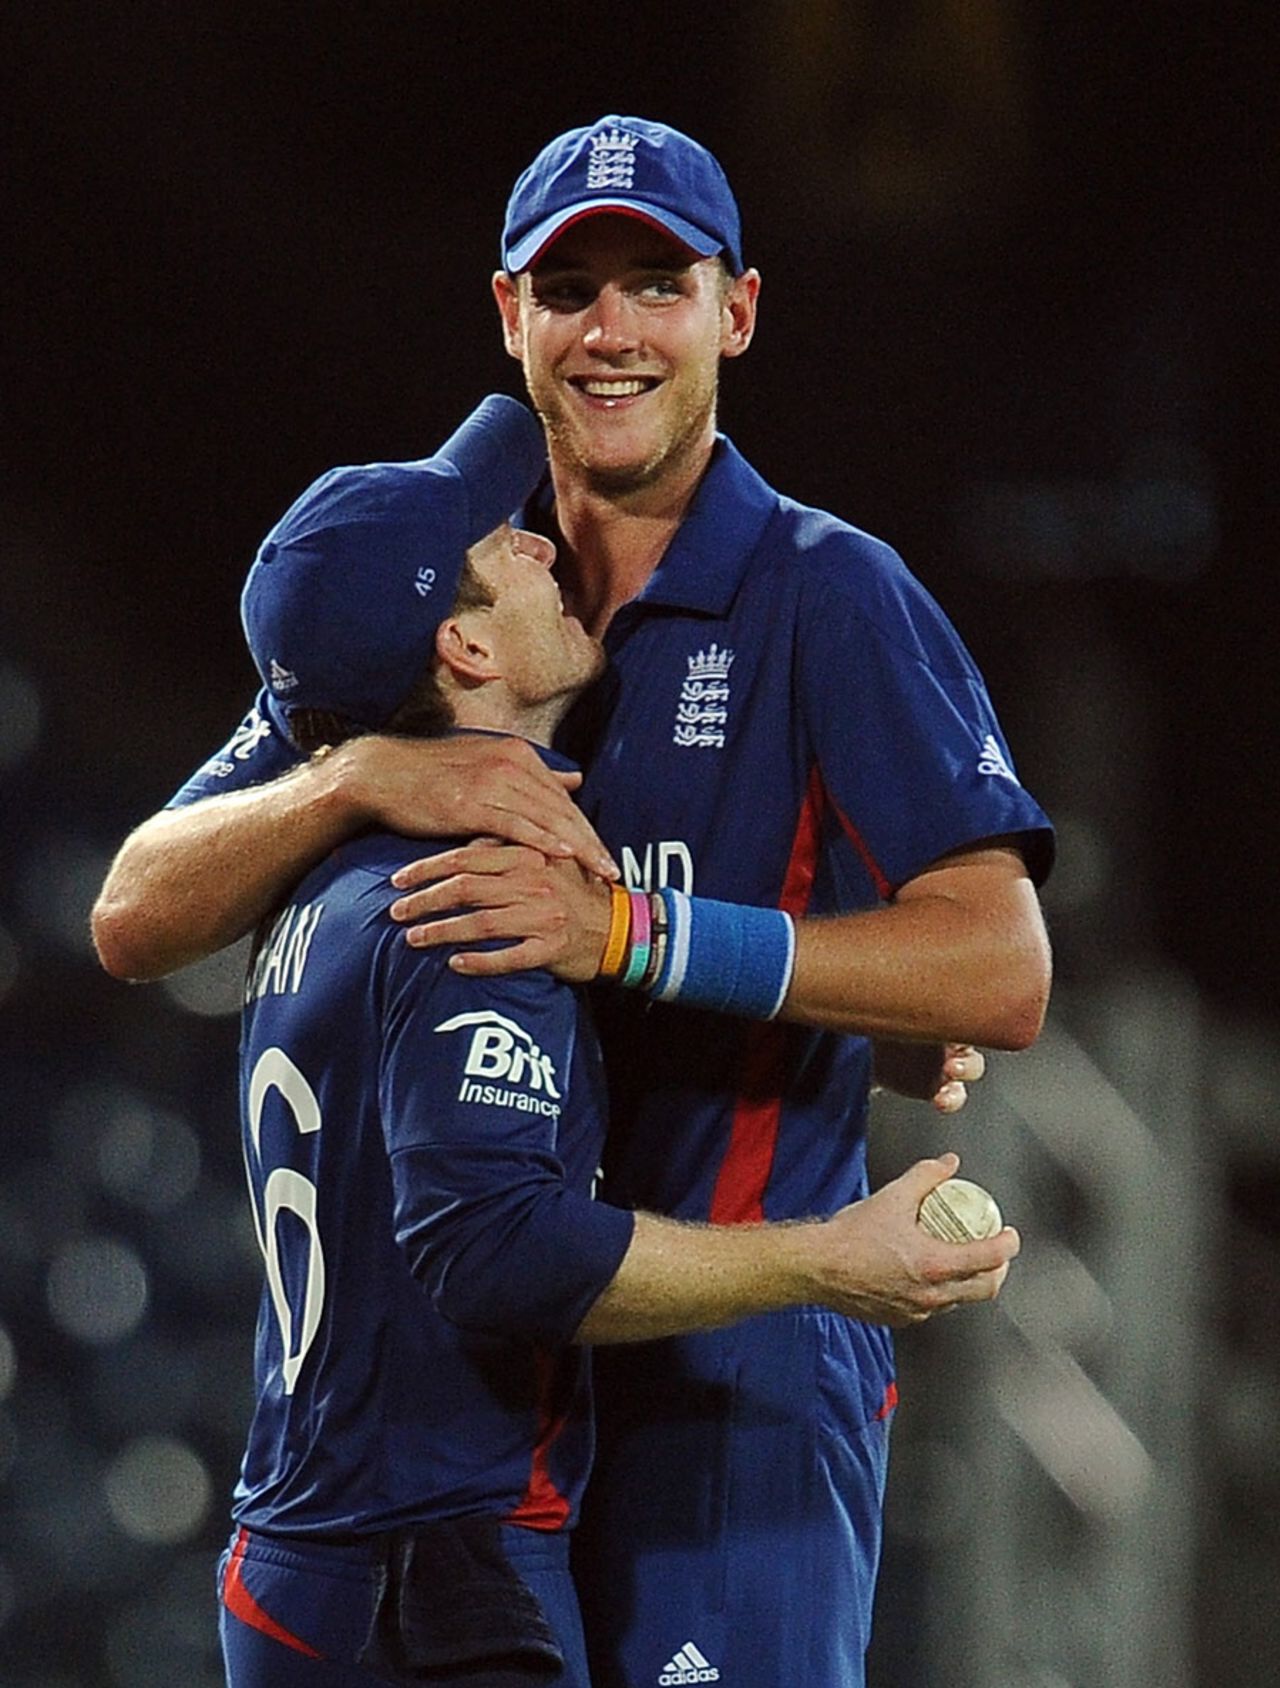 It was an enjoyable evening for Stuart Broad and his team, Afghanistan v England, World Twenty20 2012, Group A, Colombo, September 21, 2012